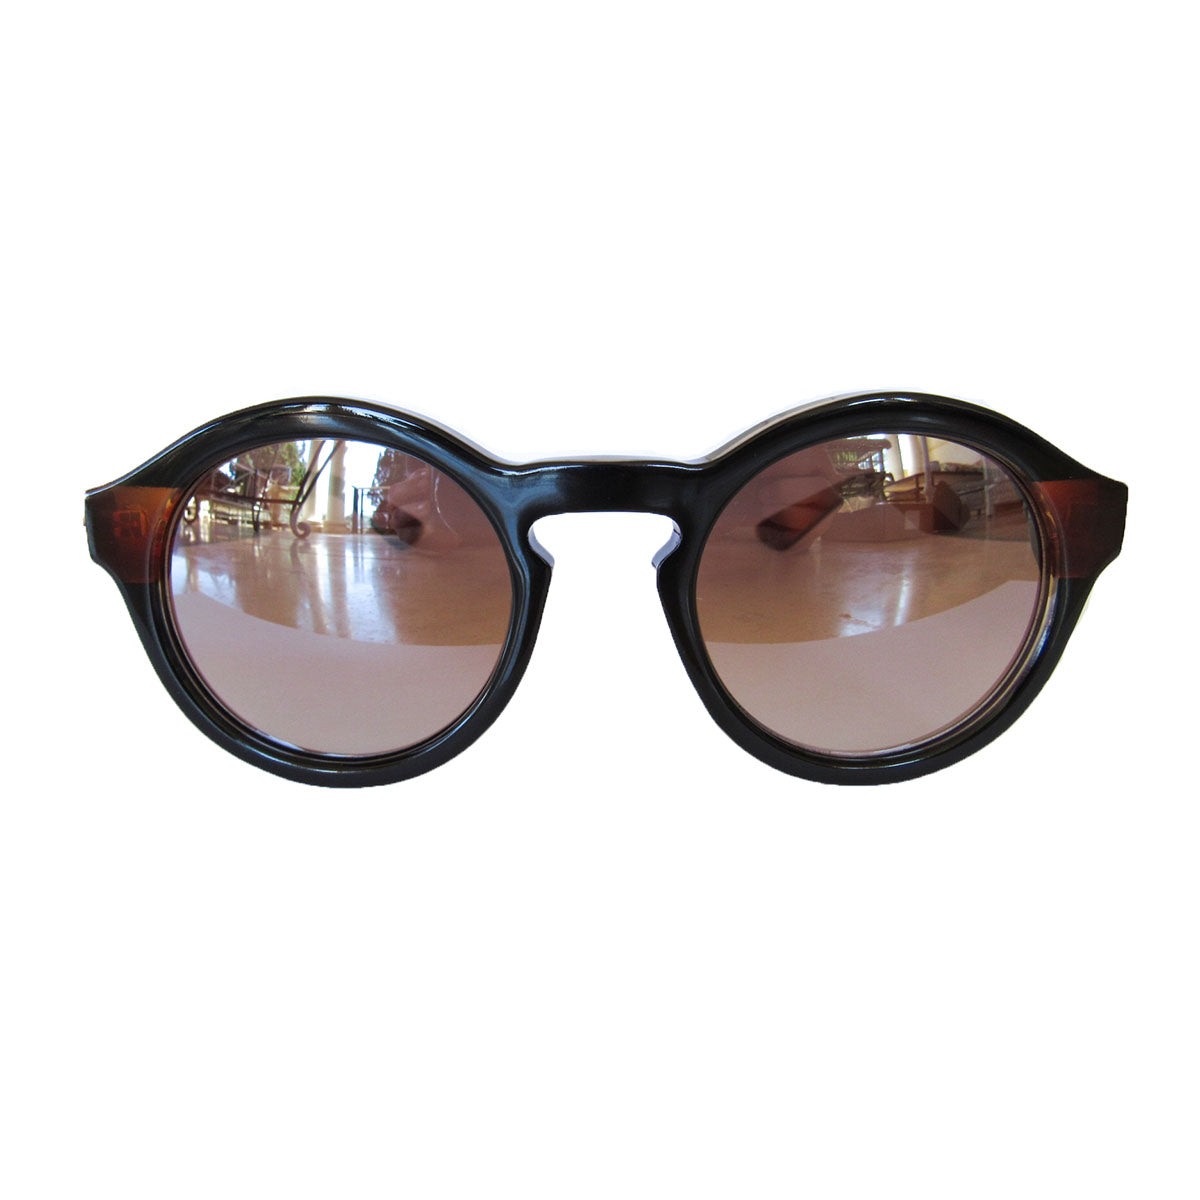 Round Black Small Sized Sunglasses w/ Caramel Arms and Silver Mirrored Lenses